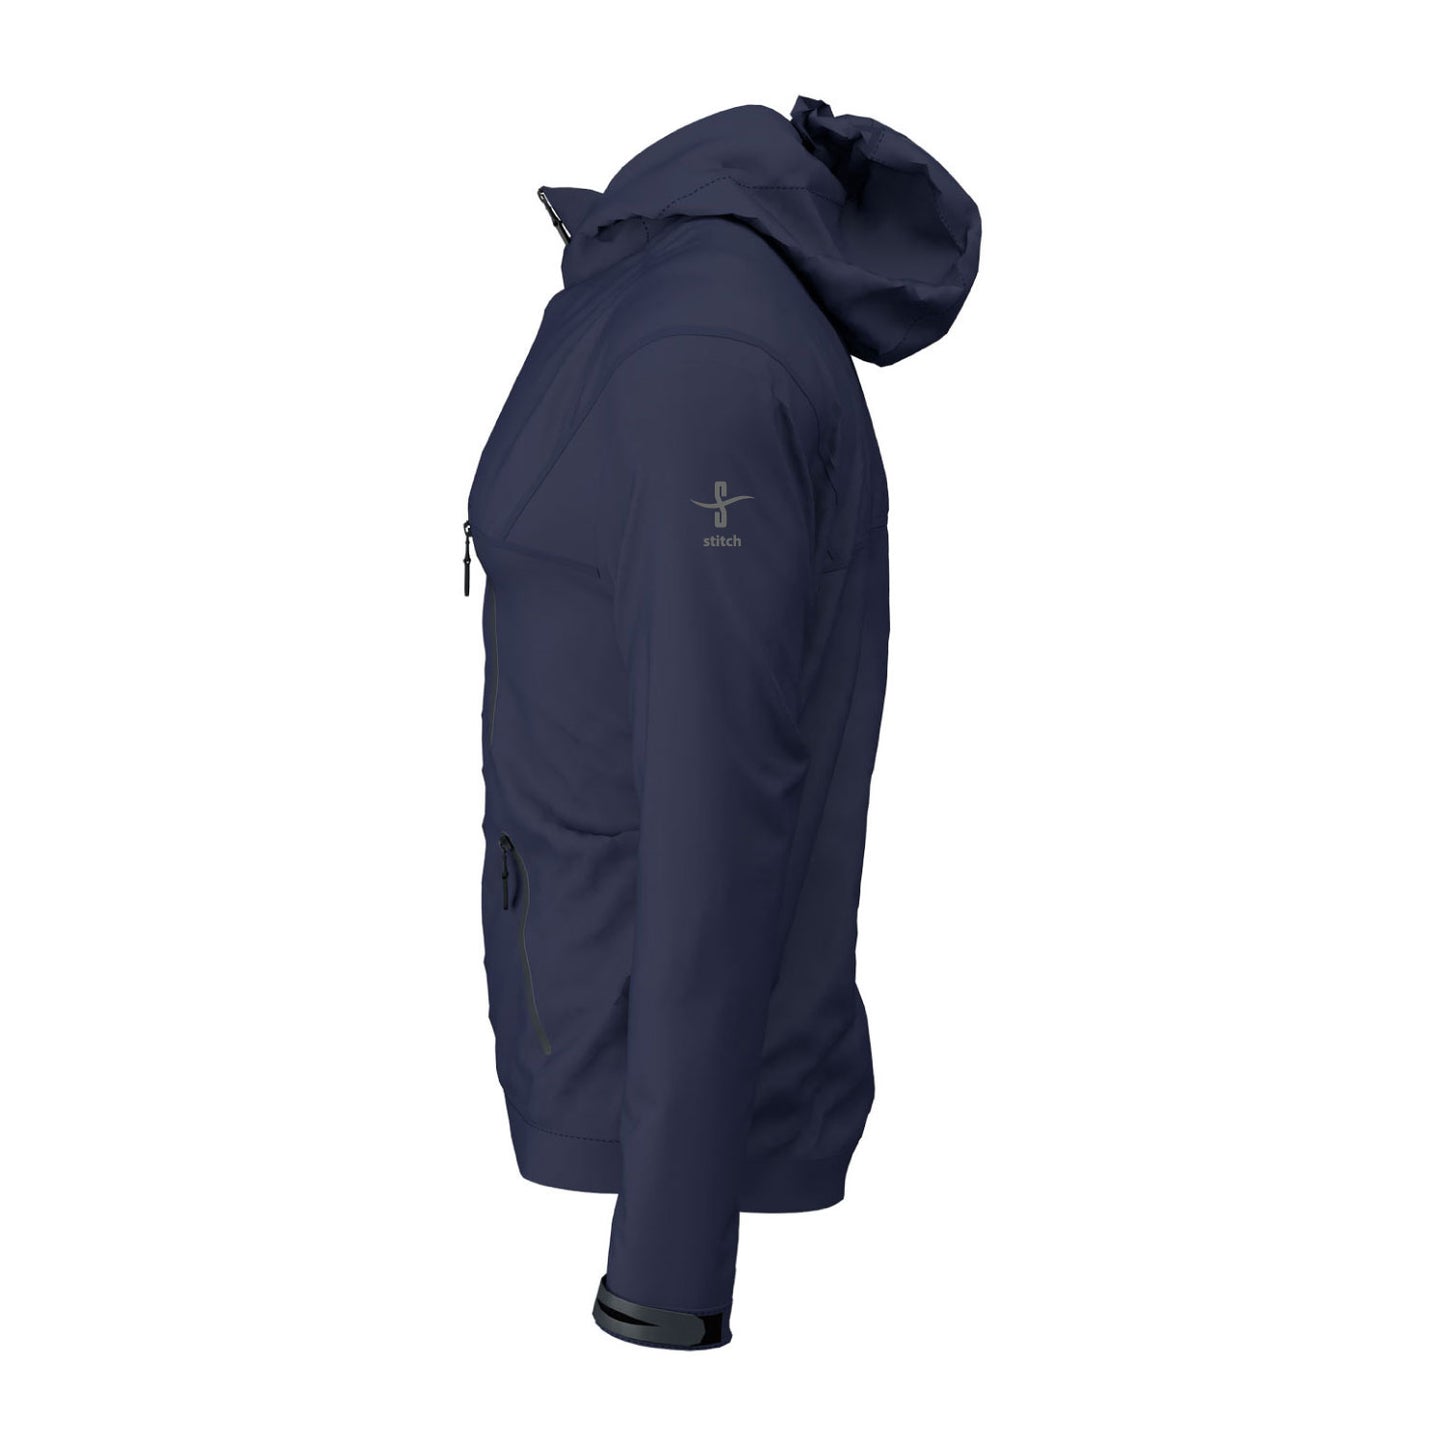 Independence RC Technical Jacket